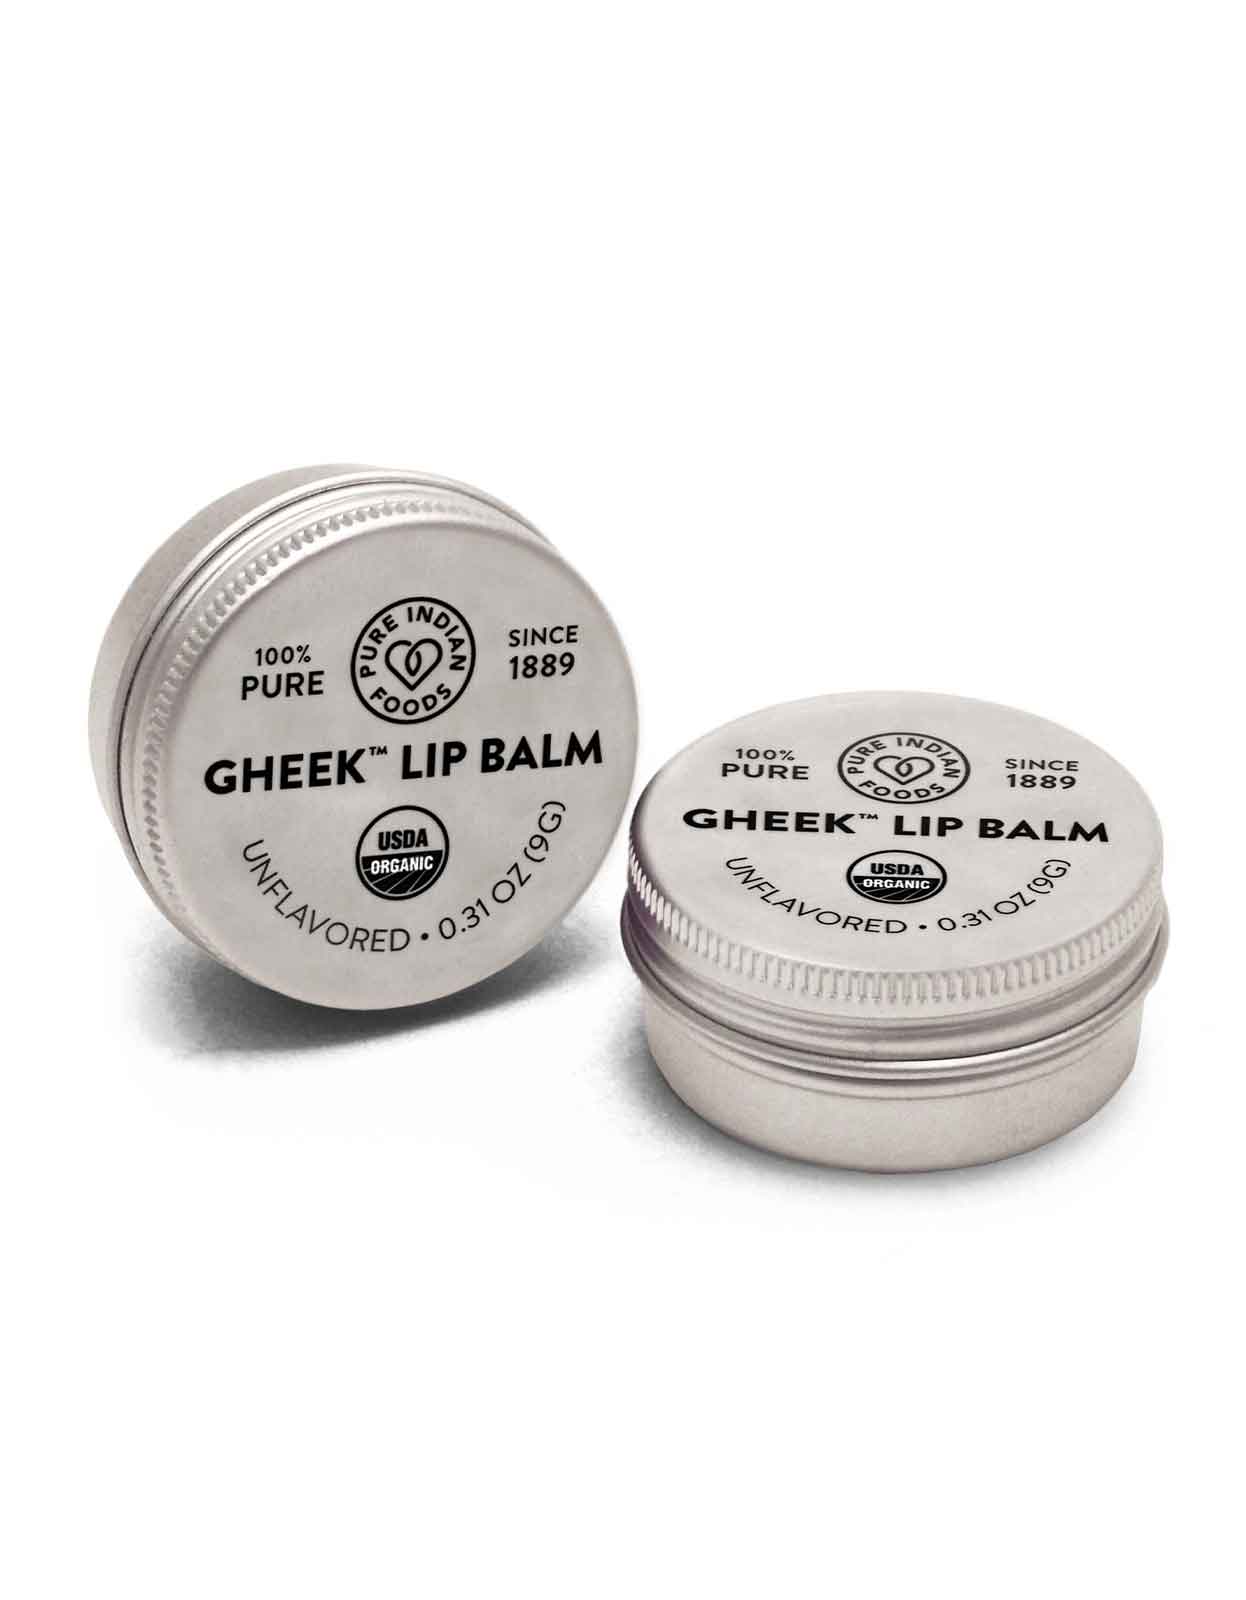 2 tins of ghee lip balm. Made with grass-fed ghee from Pure Indian Foods.